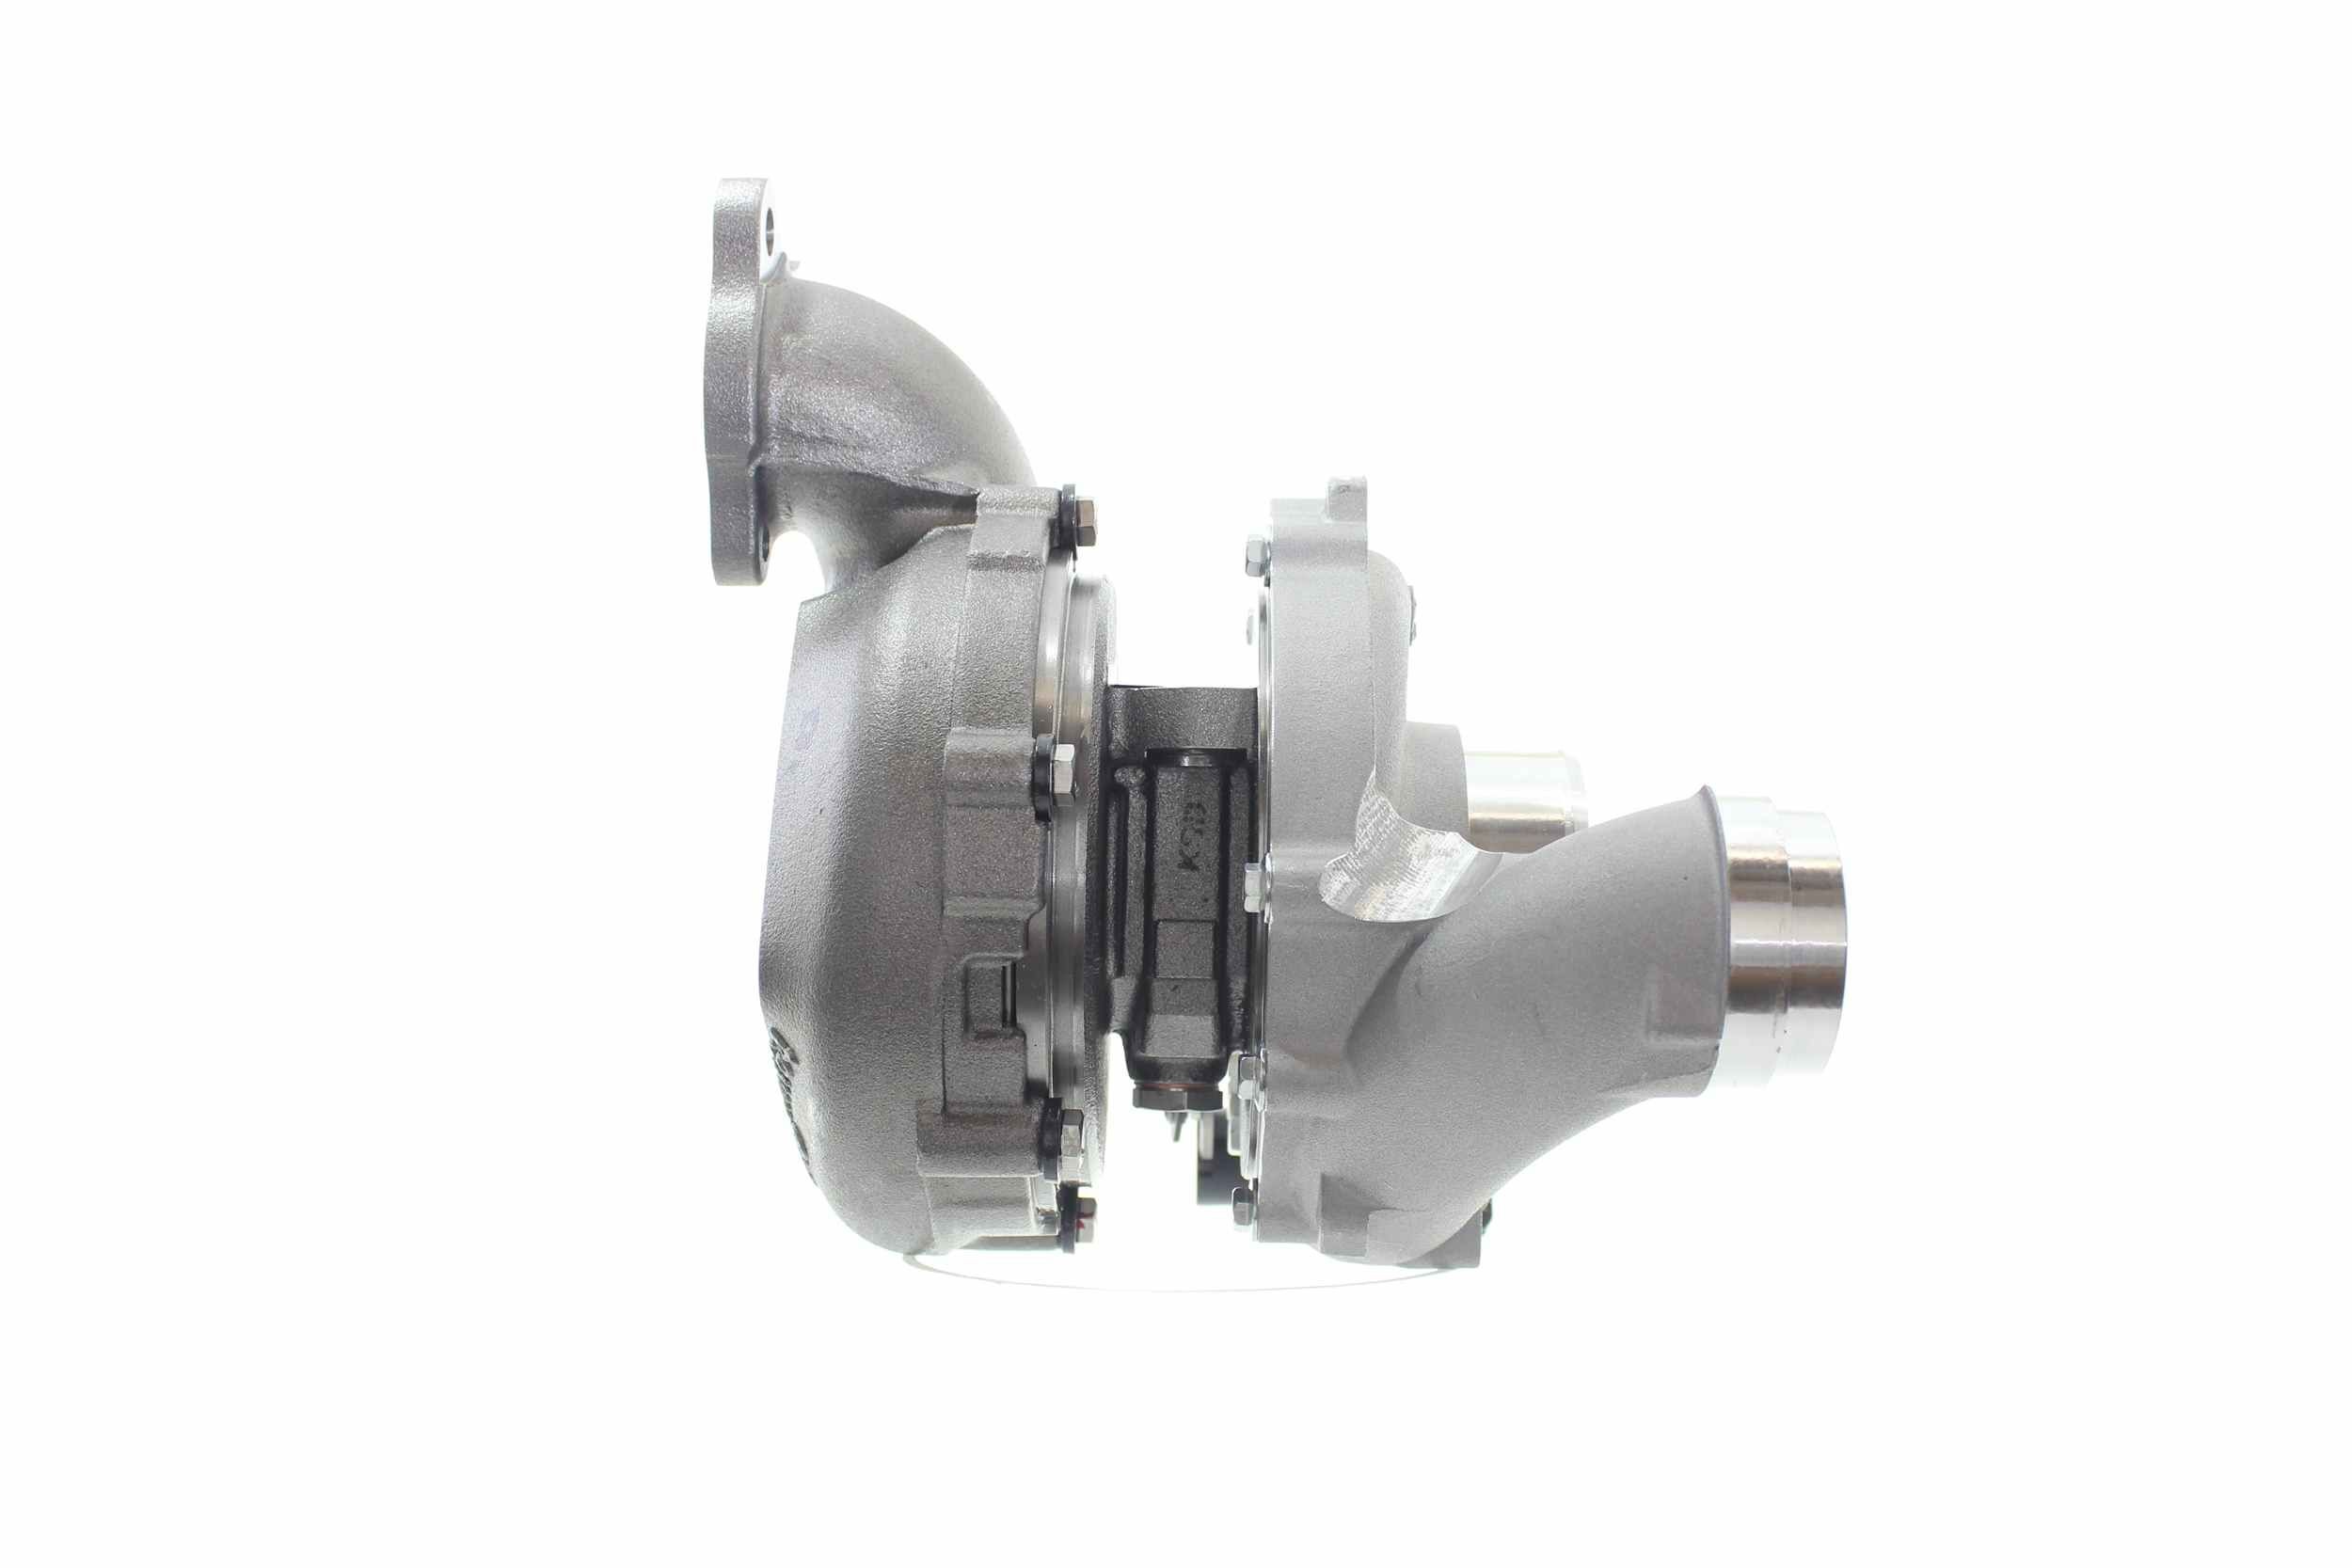 10901029 Turbocharger 764381 ALANKO Exhaust Turbocharger, Incl. Gasket Set, with attachment material